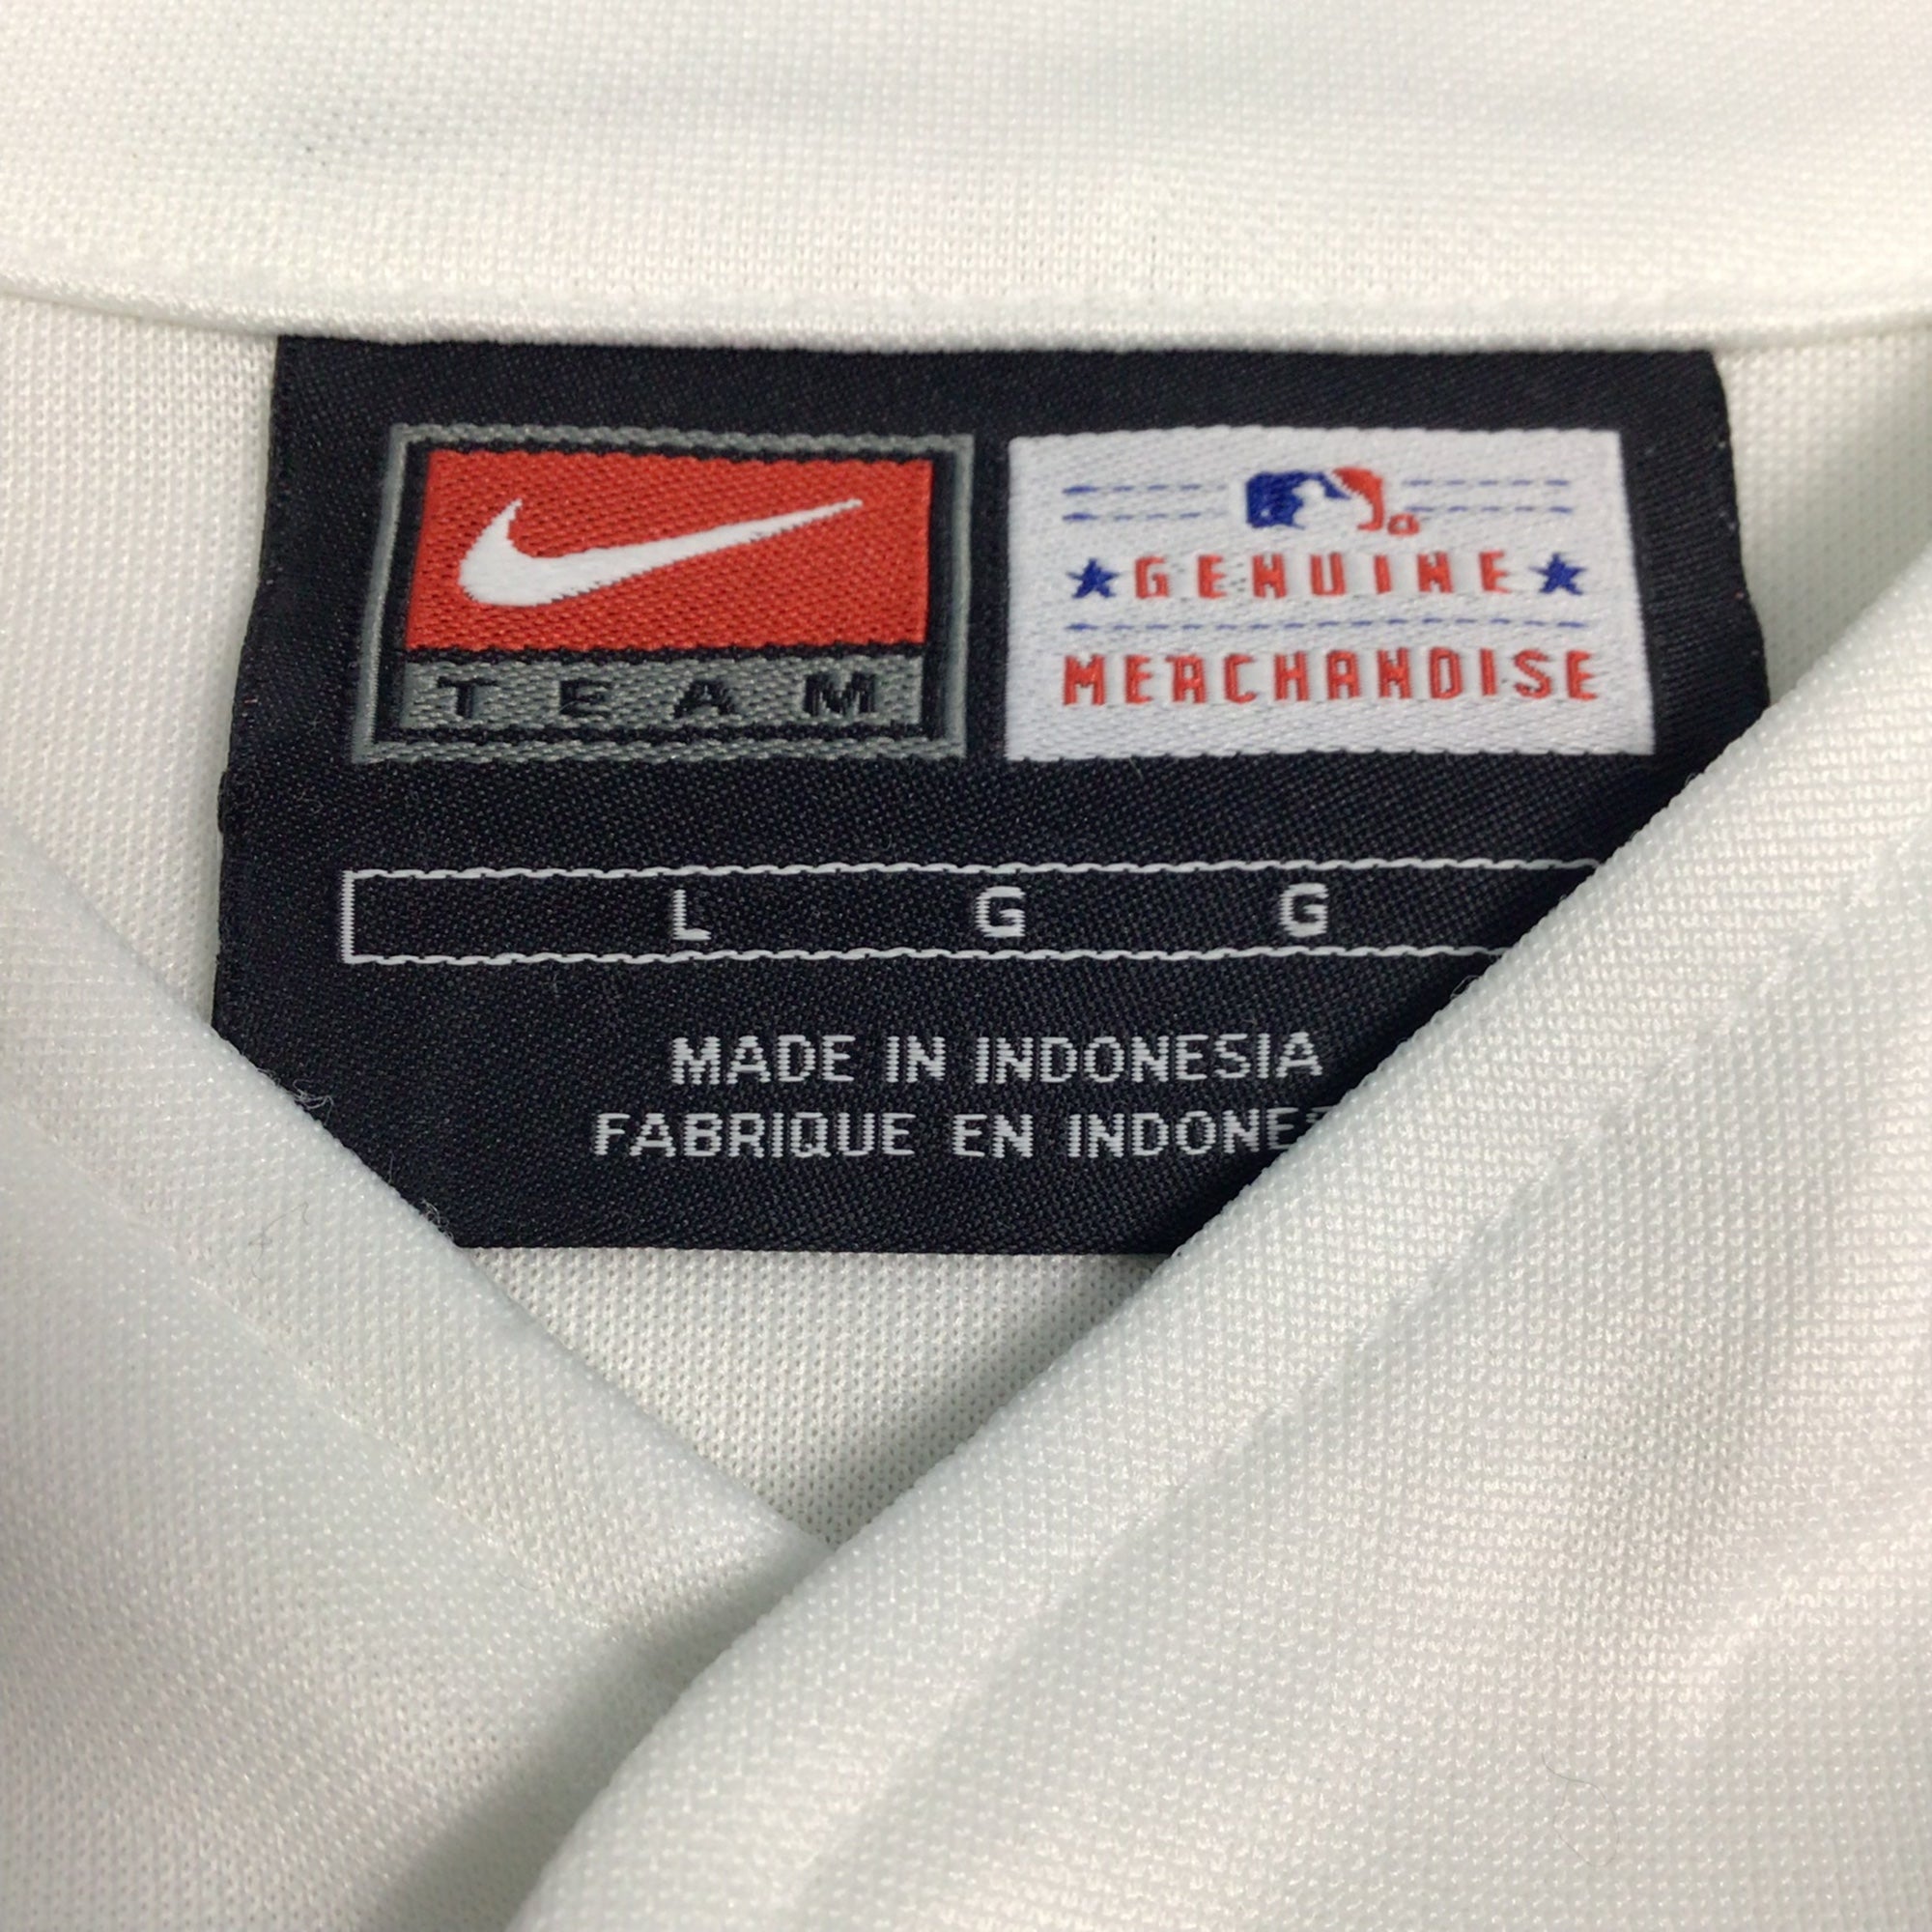 Nike Seattle Mariners MLB button front ombre jersey. Tagged as an